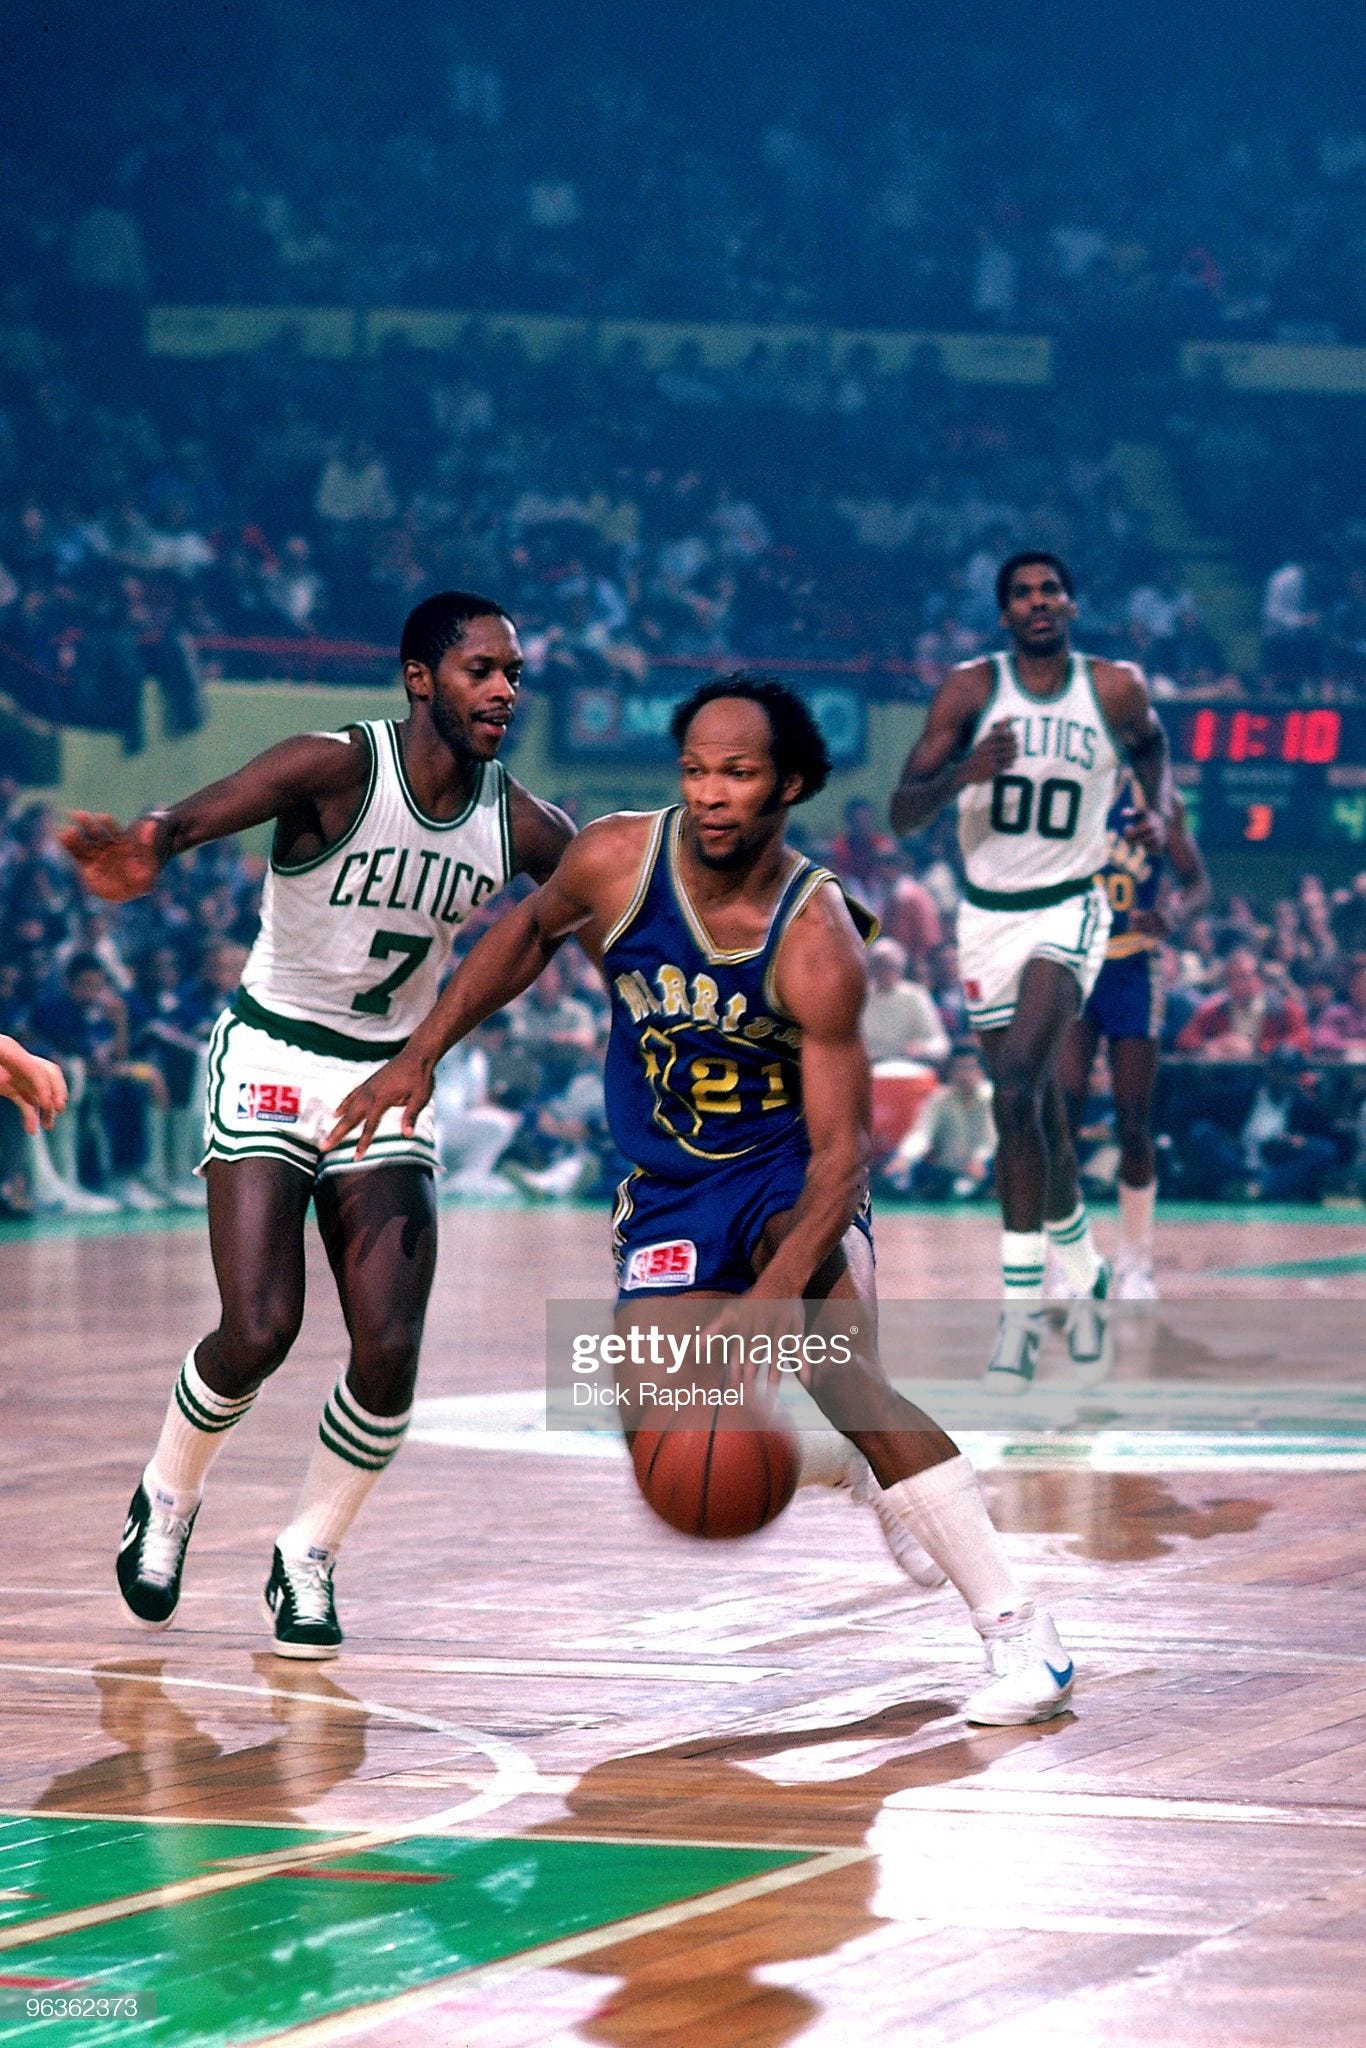 World B. Free of the Cleveland Cavaliers shoots a free throw against